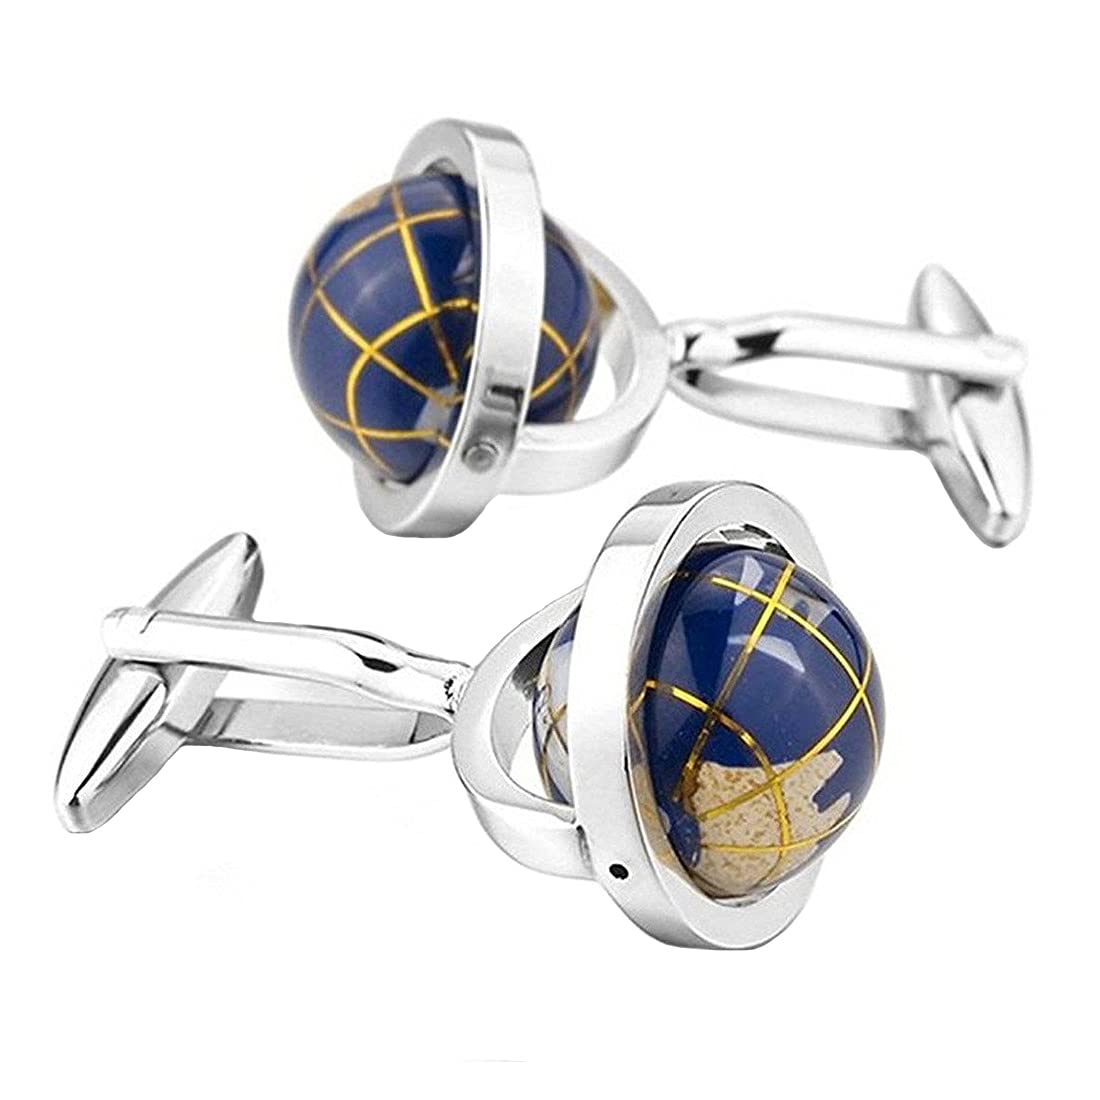 Yellow Chimes Cufflinks for Men and Boys Blue Cuff links | Formal Stainless Steel Unique Spin-Able Earth Globe Blue Cufflink | Birthday Gift for Men and Boys Anniversary Gift for Husband